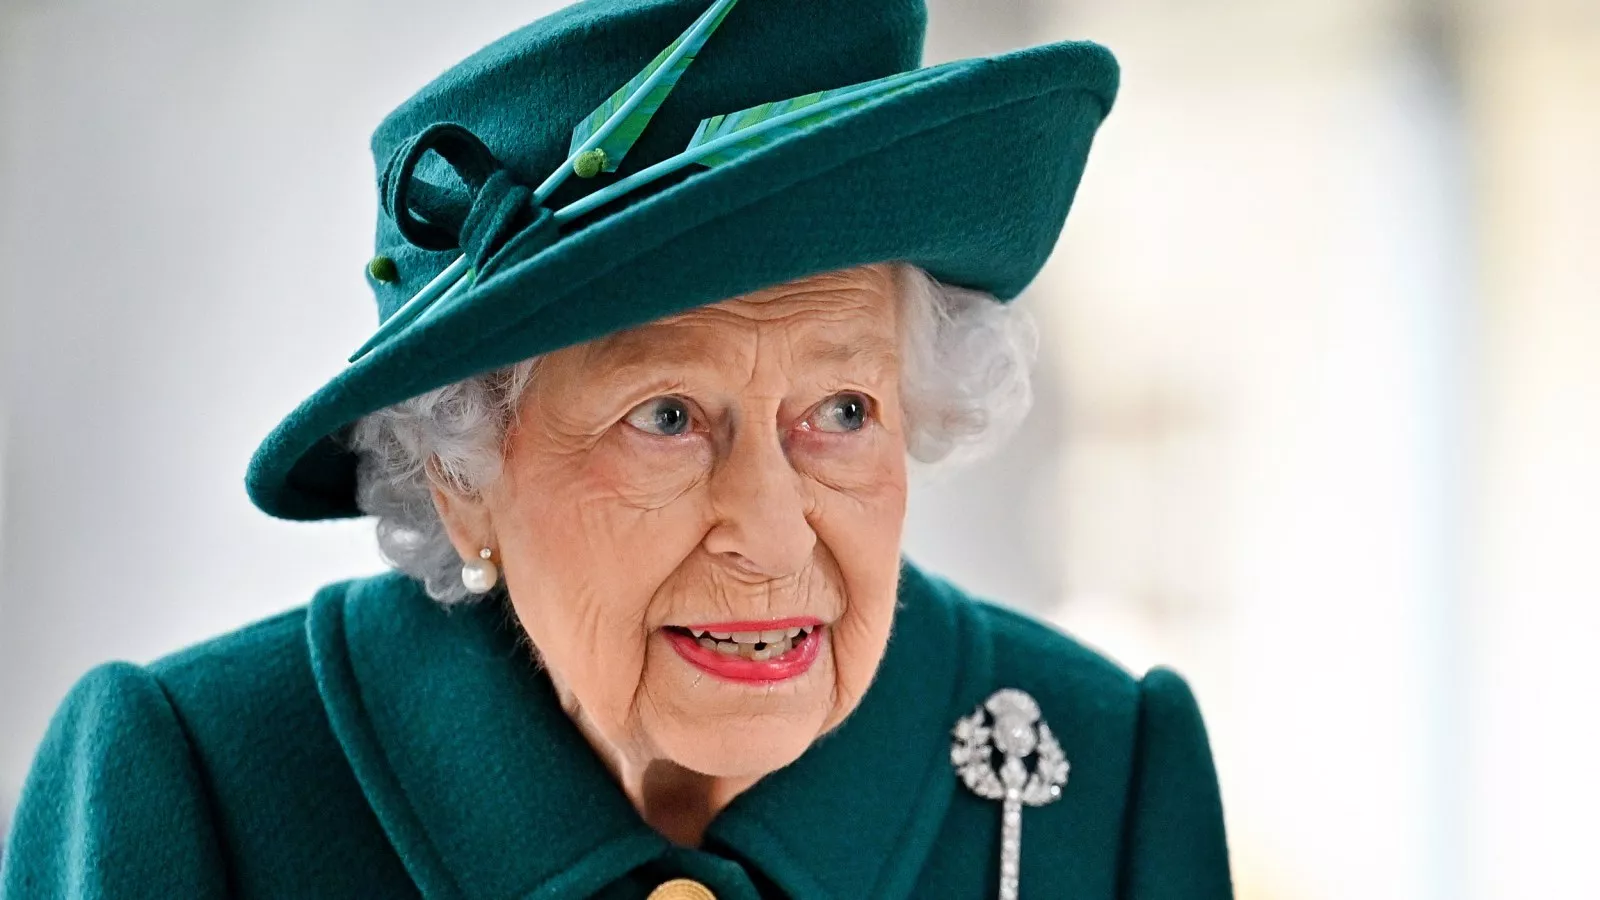 Gossip site’s “false” story claiming queen is dead sparks ridicule